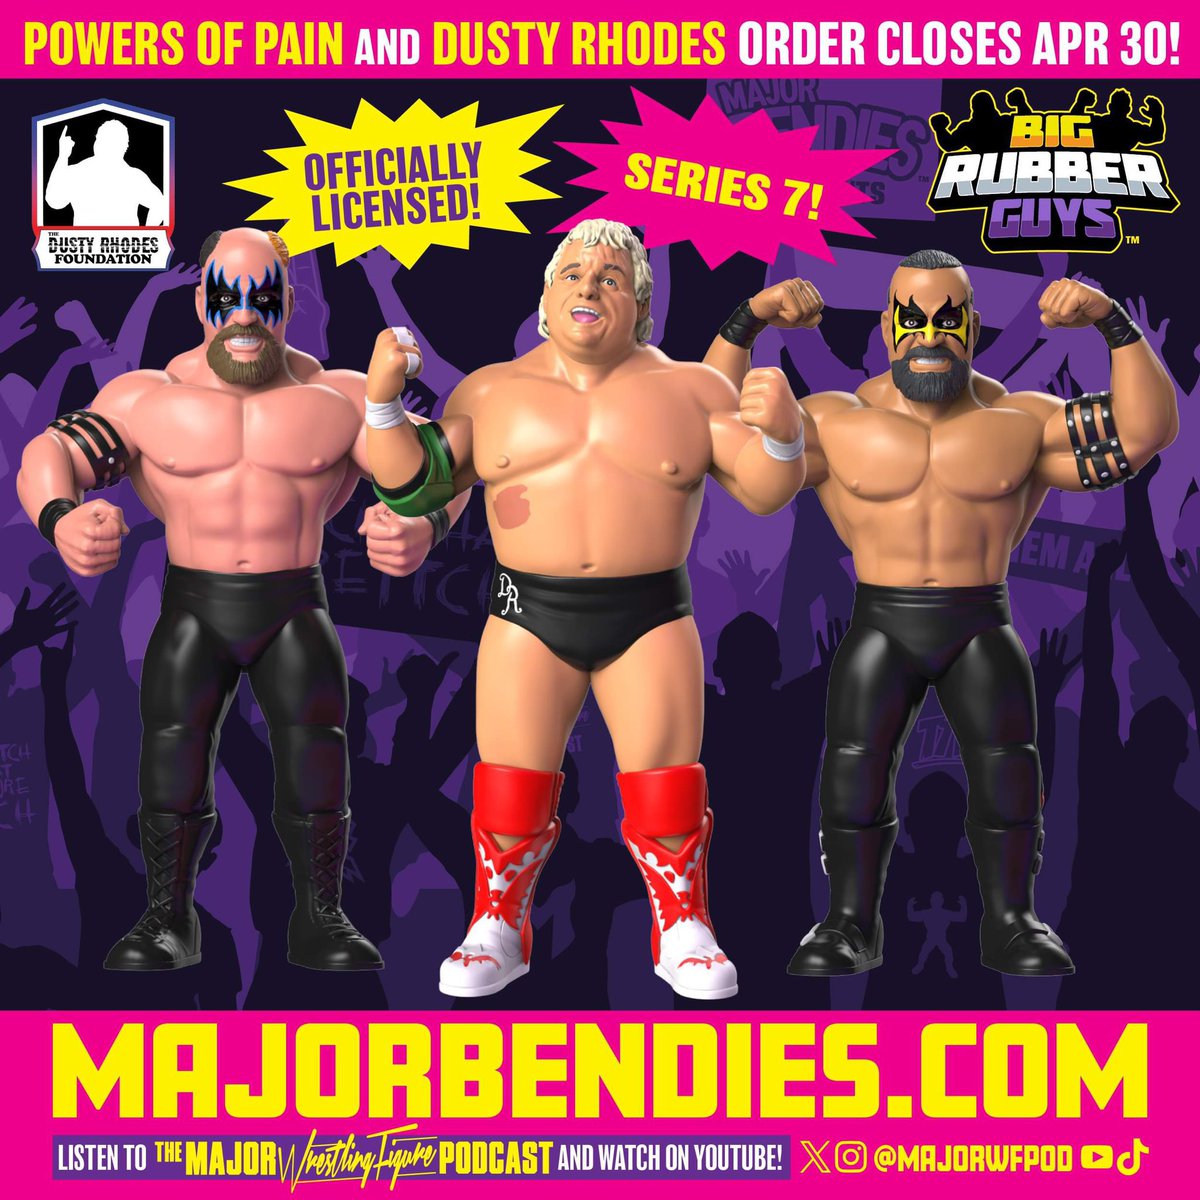 @majorbendies just dropped Big Rubber Guys series 7 featuring Dusty Rhodes & Powers of pain! 

Pre-order NOW @ majorbendies.com!

#figheel #actionfigures #toycommunity #toycollector #wrestlingfigures #wwe #aew #njpw #tna